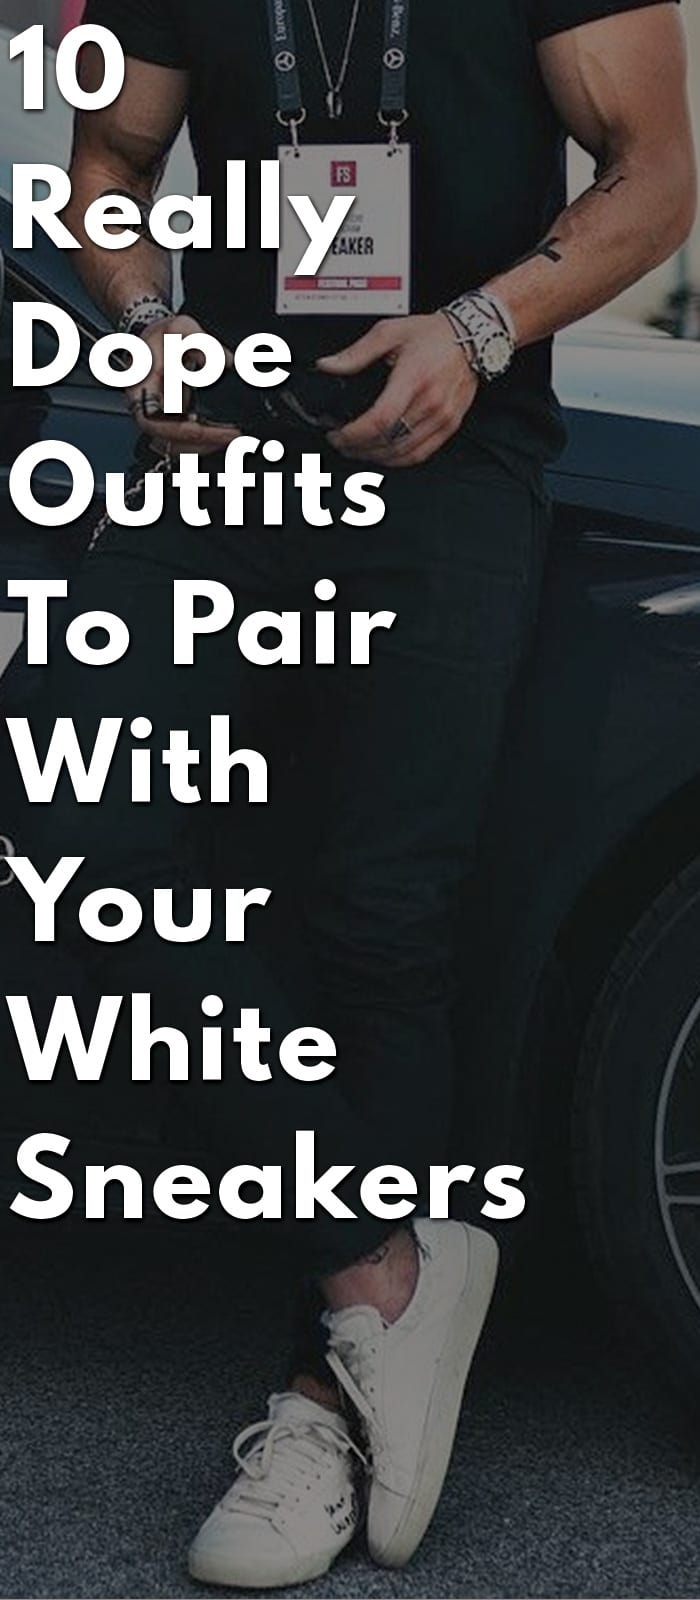 10-Really-Dope-Outfits-To-Pair-With-Your-White-Sneakers